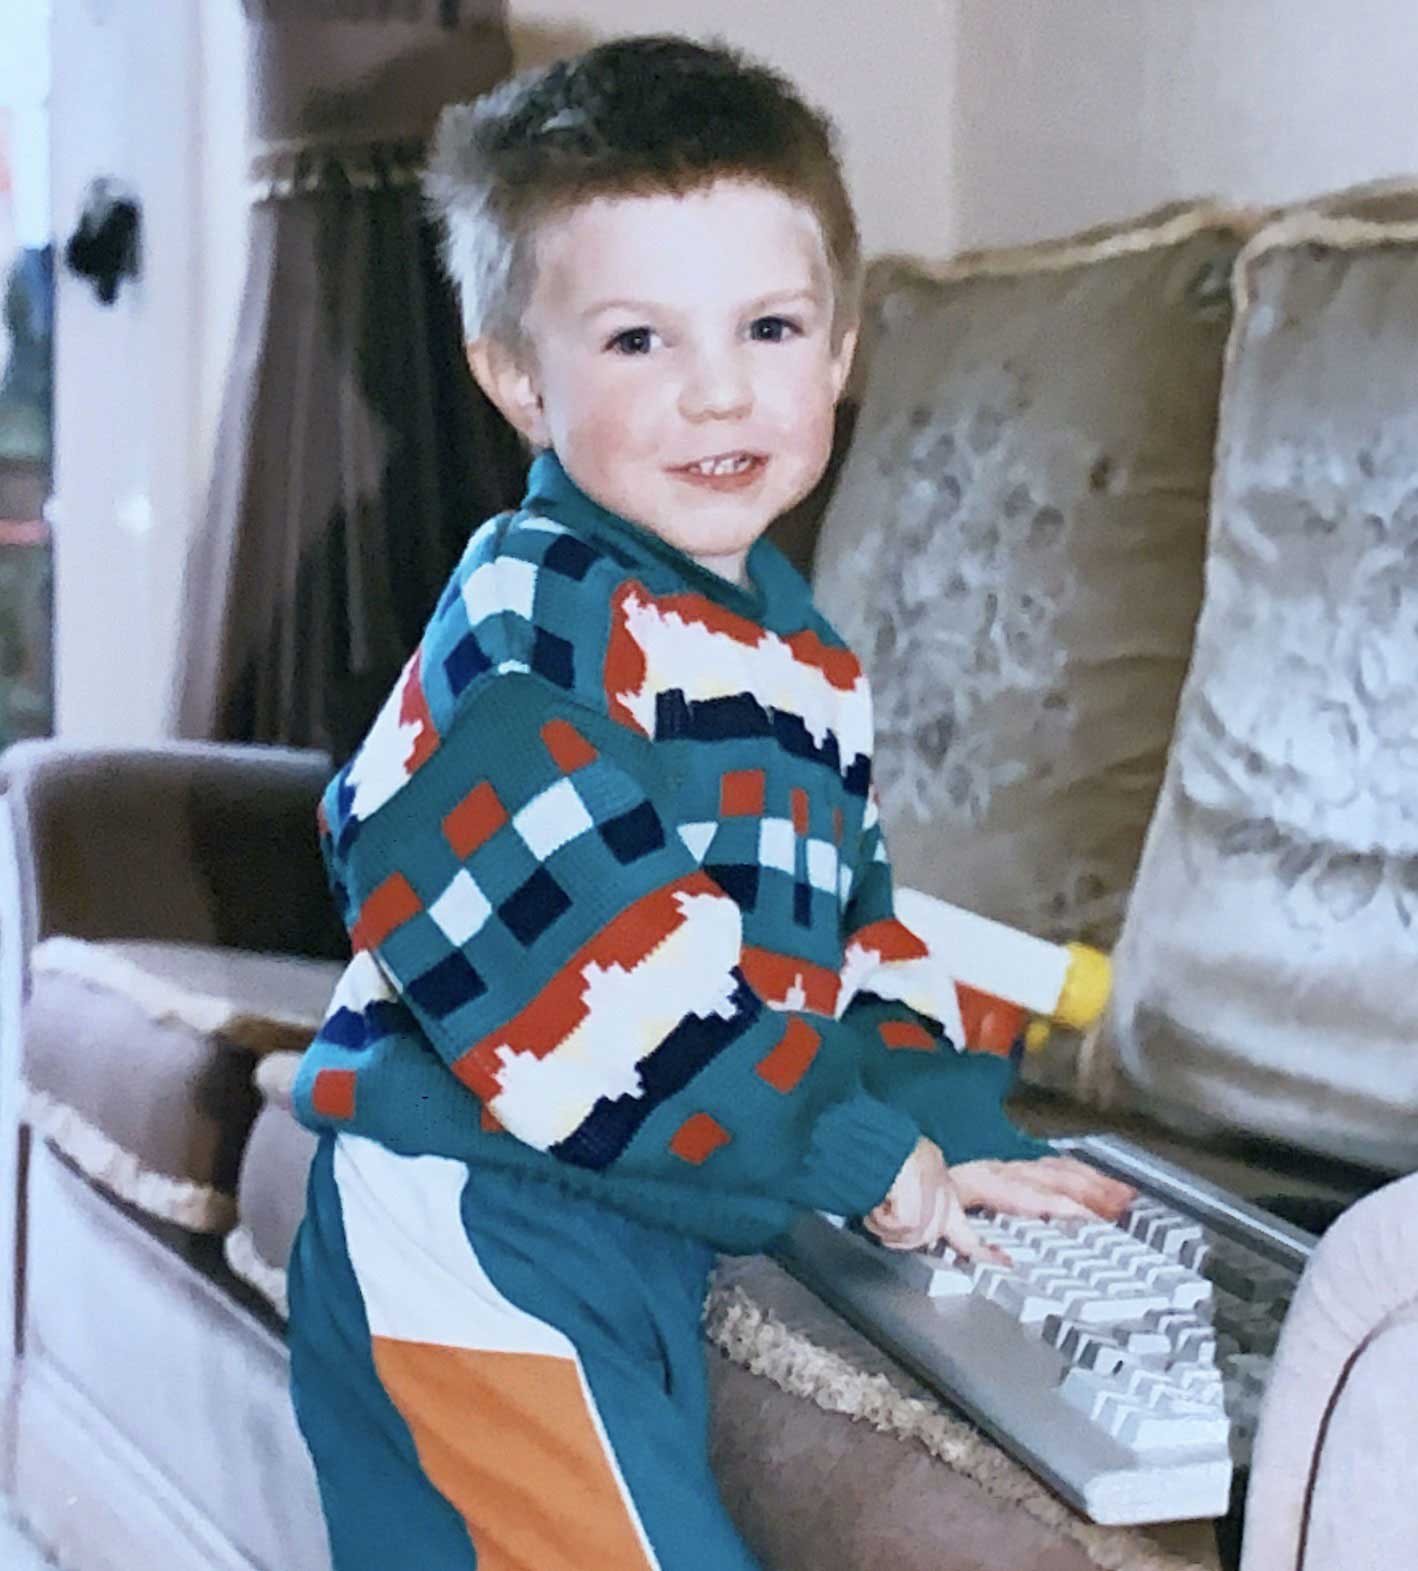 A photo of baby Dave using a computer